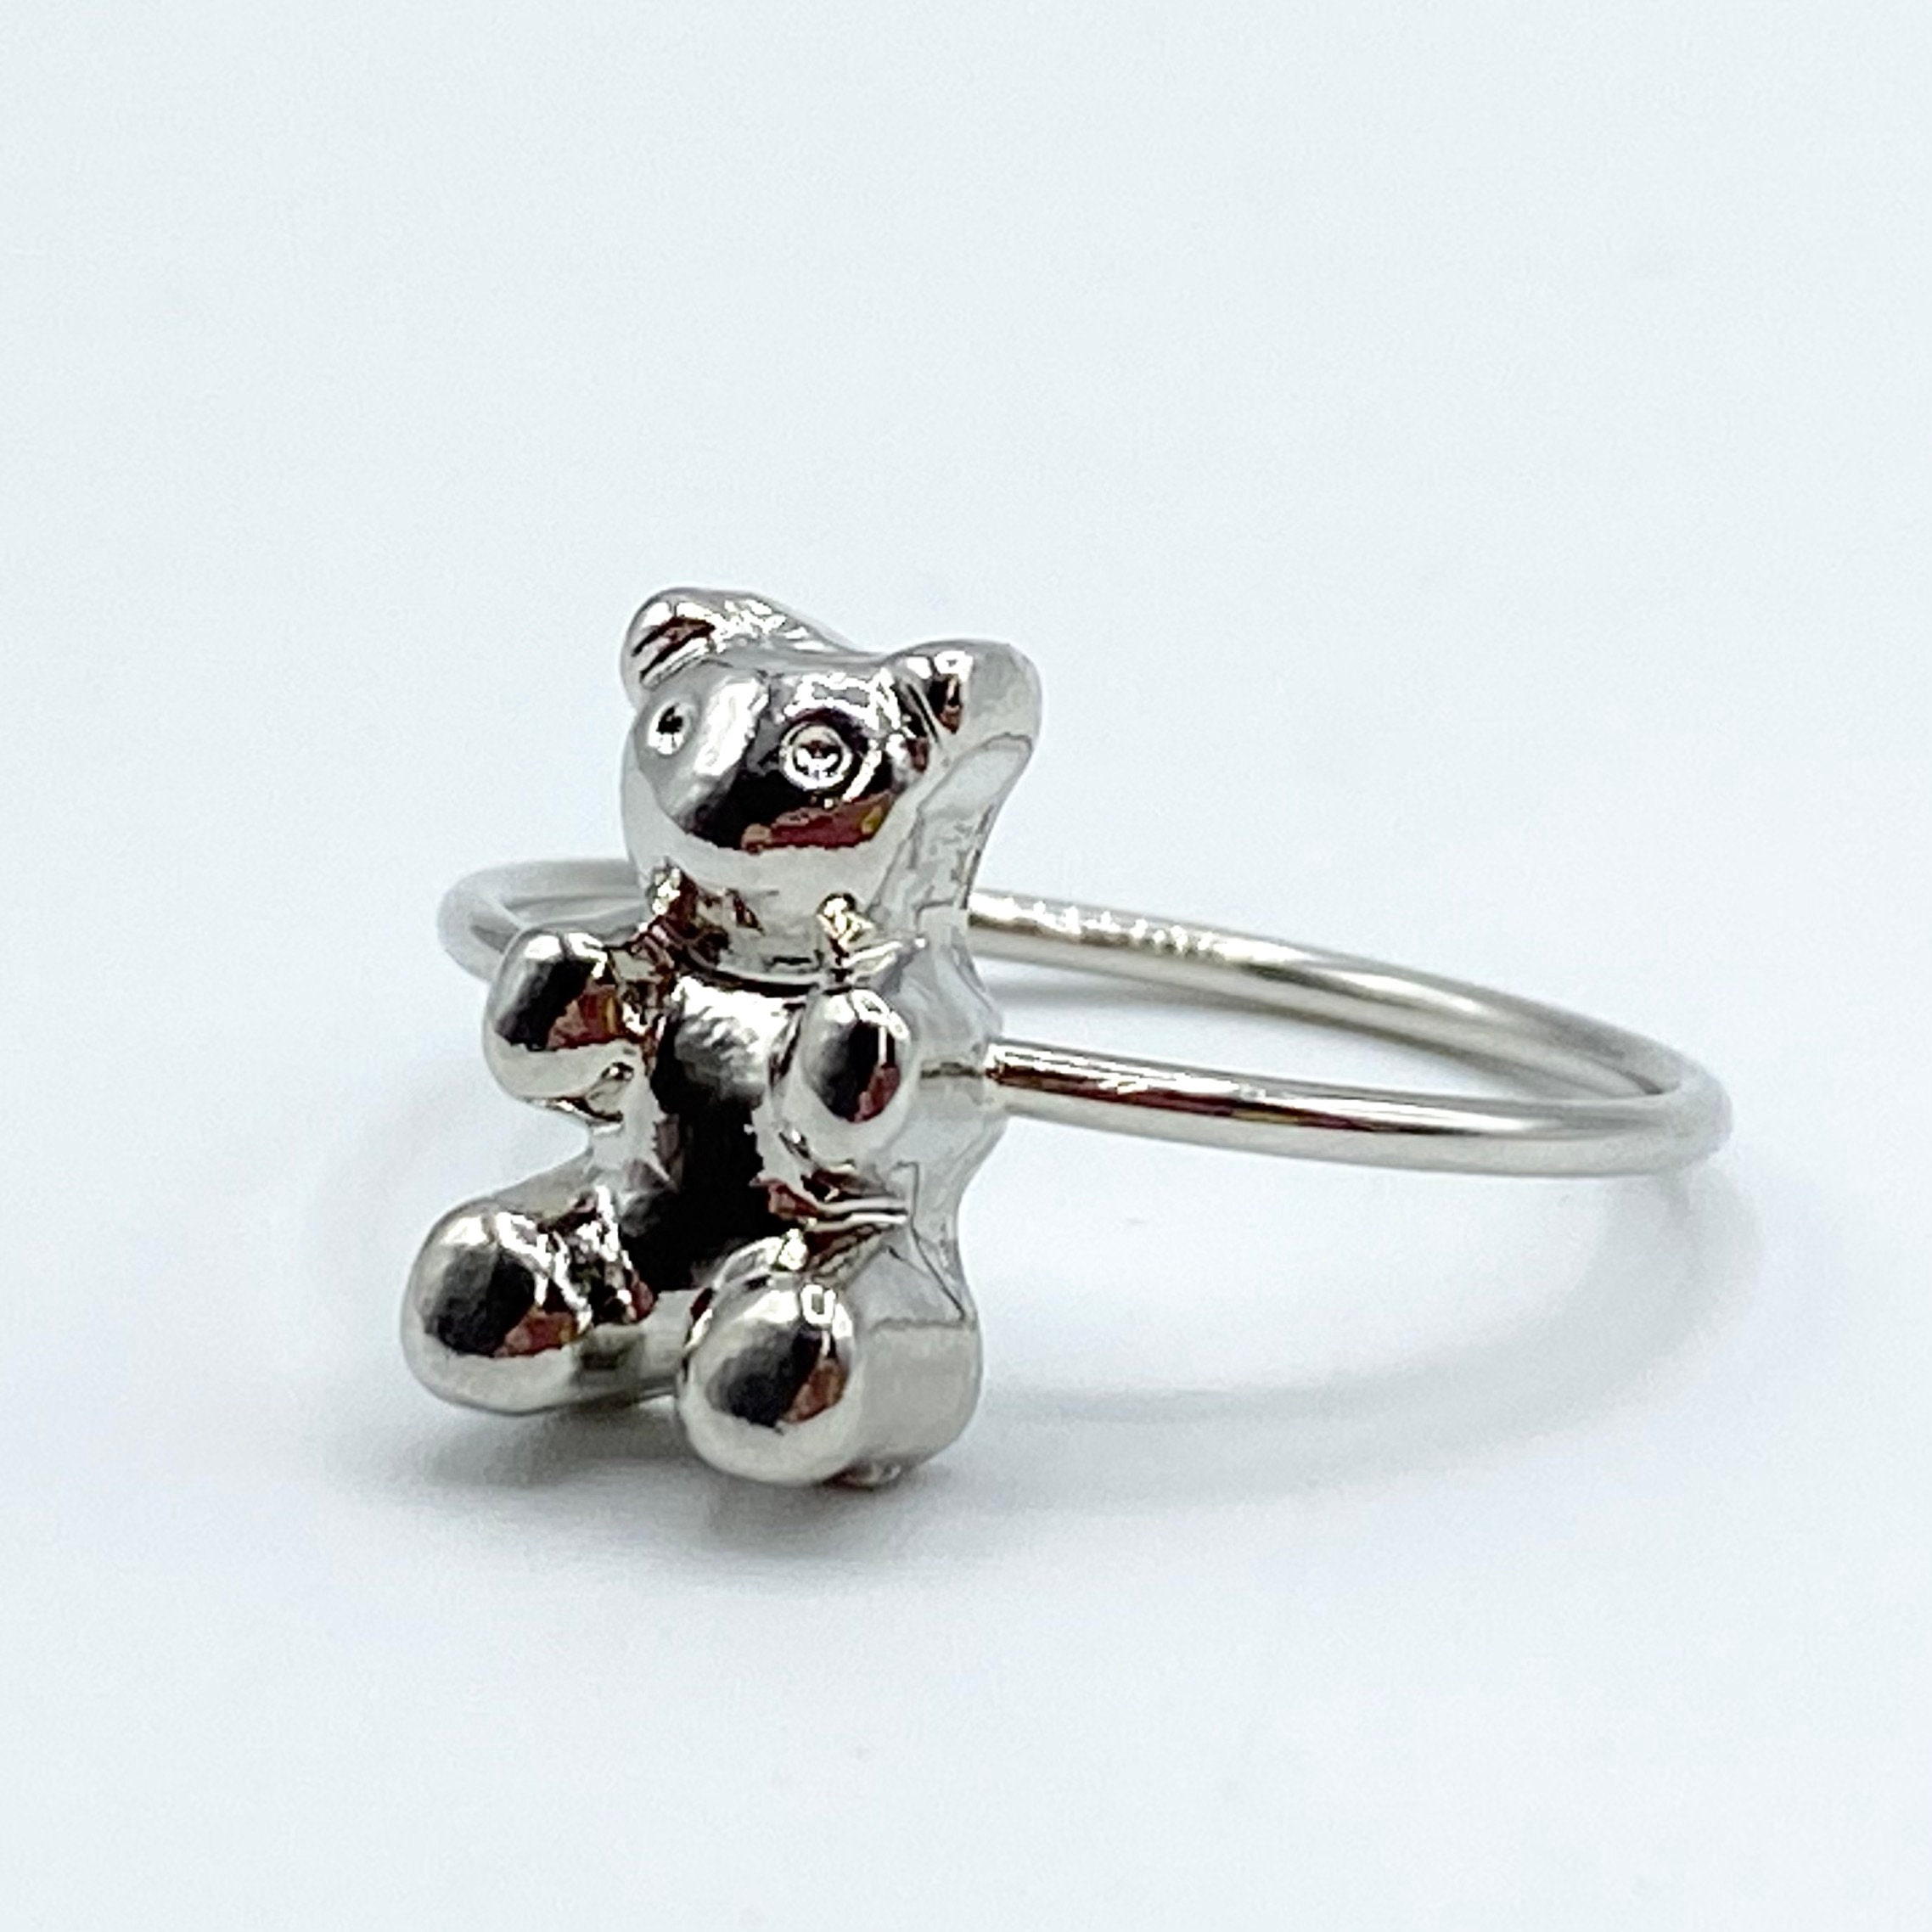 Colormerchants - 10K Yellow Gold Baby Teddy Bear and White Topaz Ring